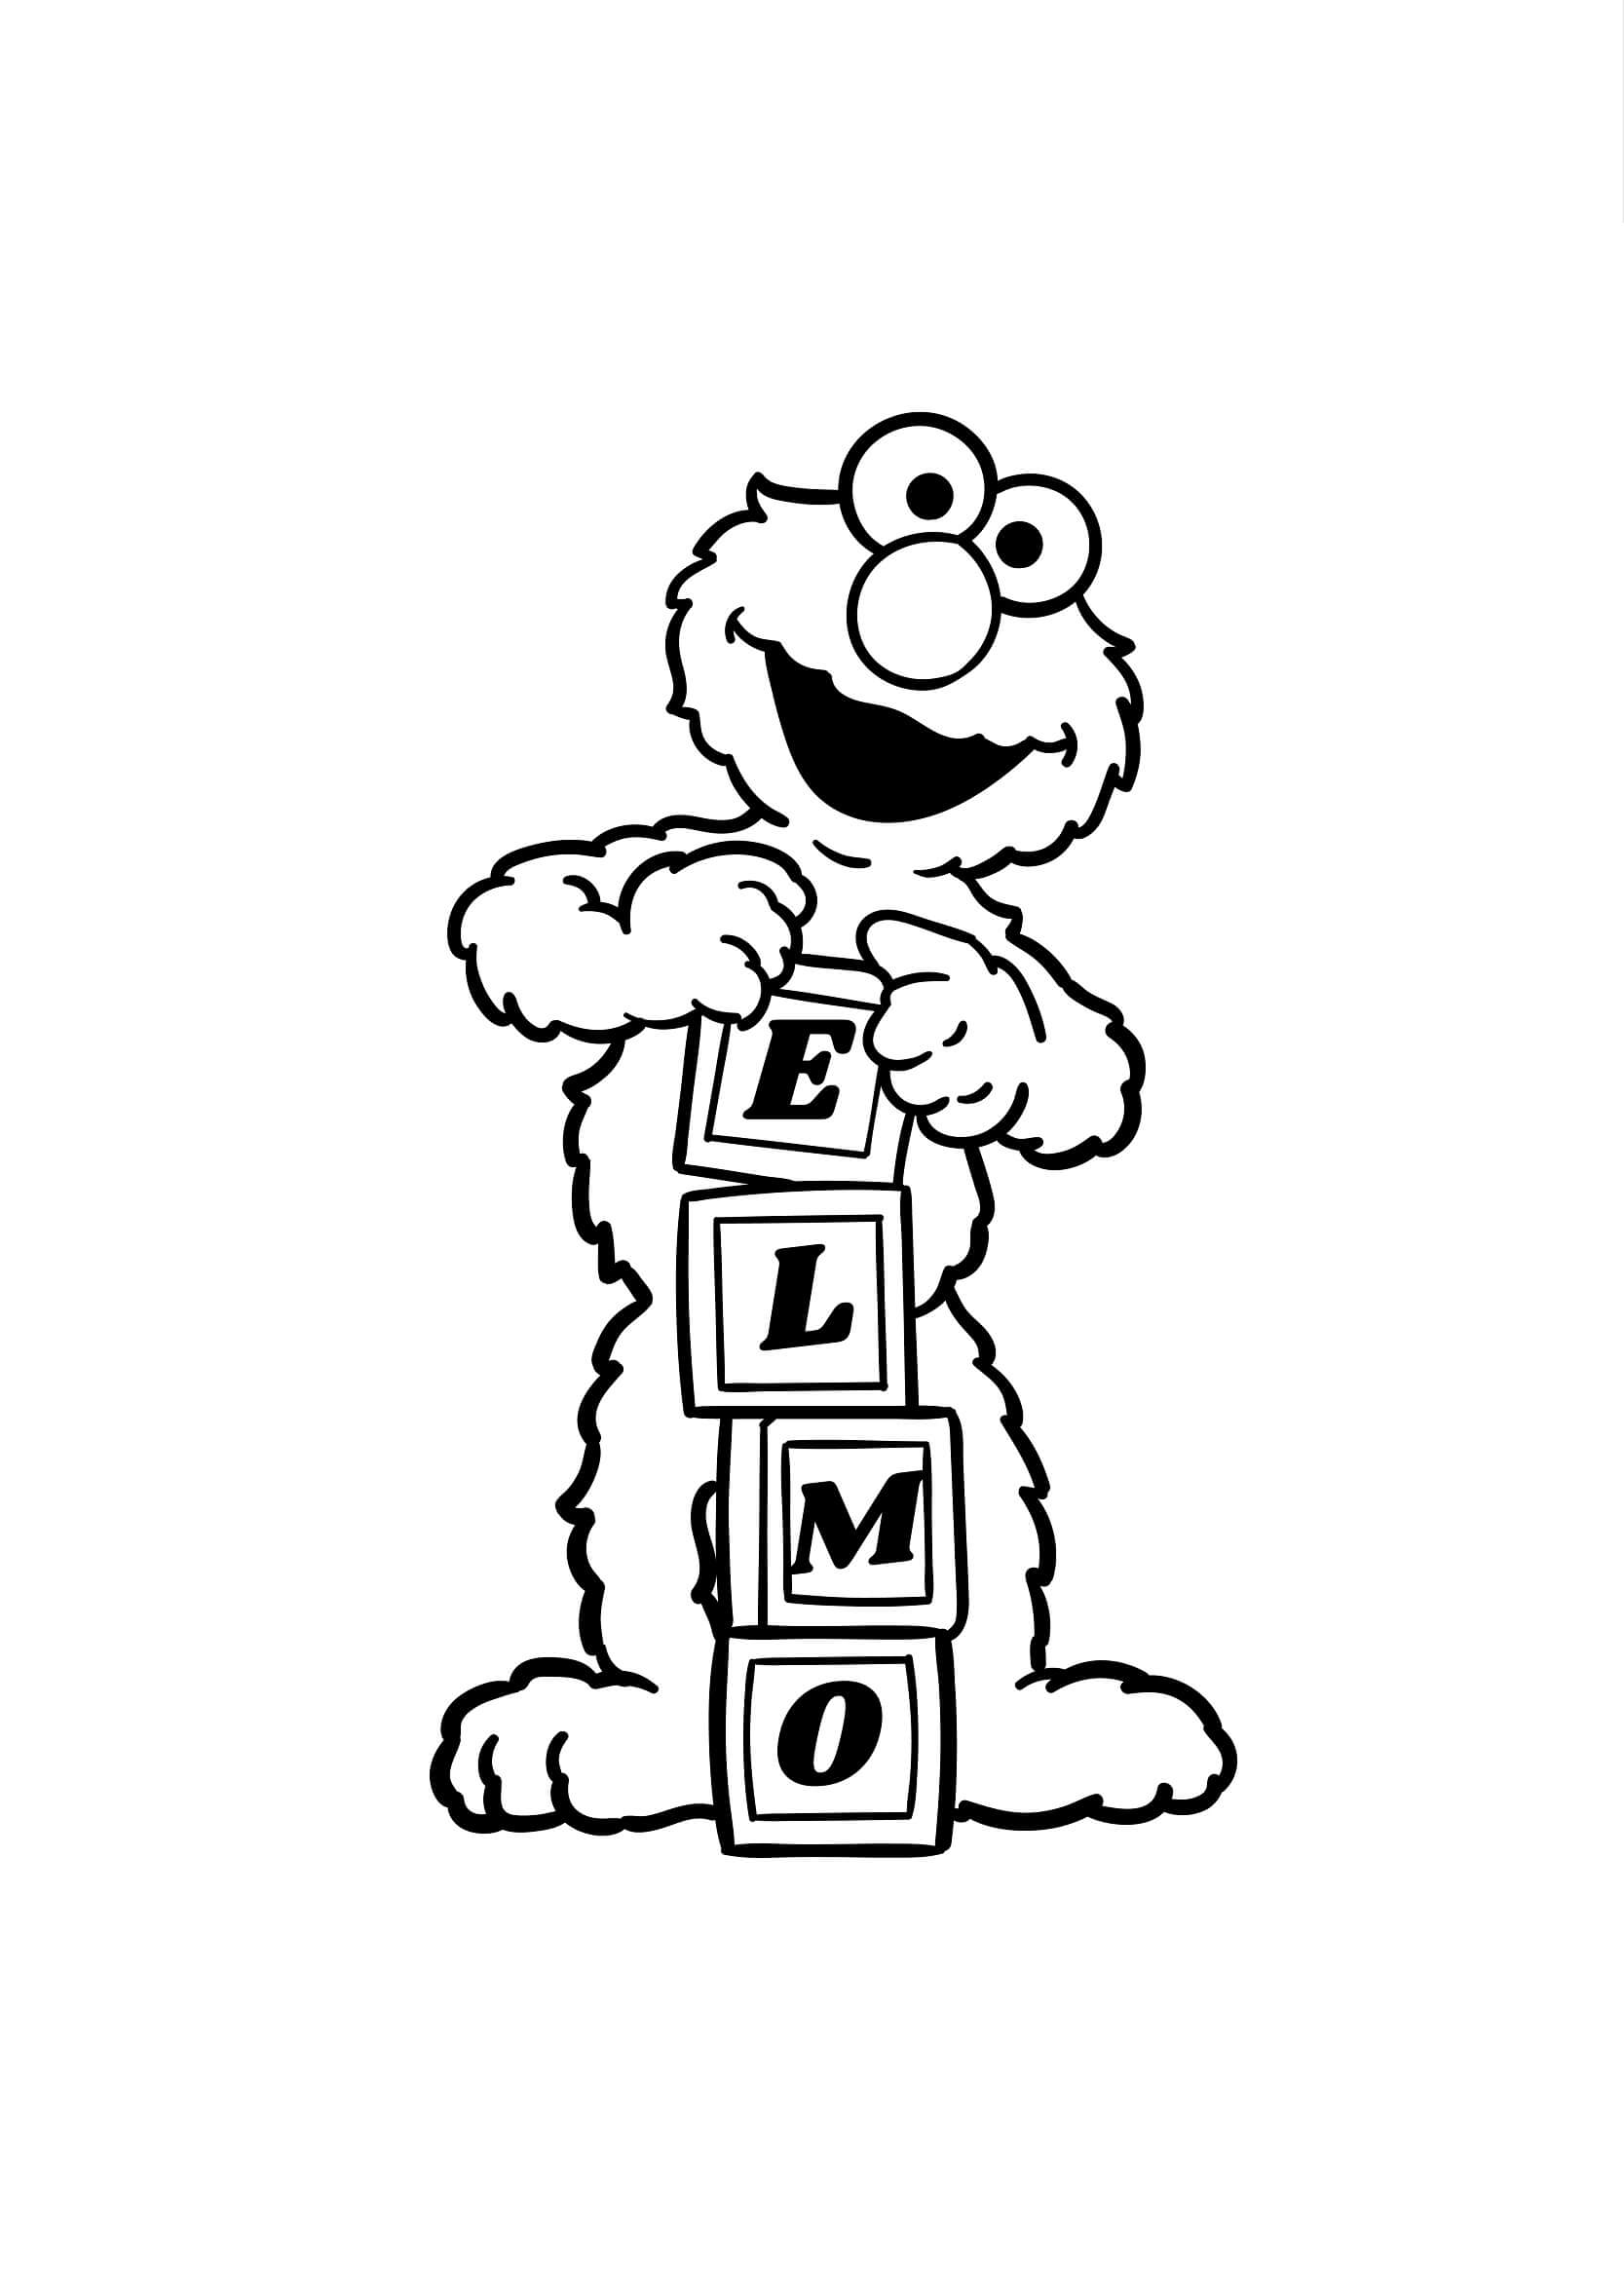 130 Elmo Coloring Page Ideas: Fun with the Furry Red Monster 128